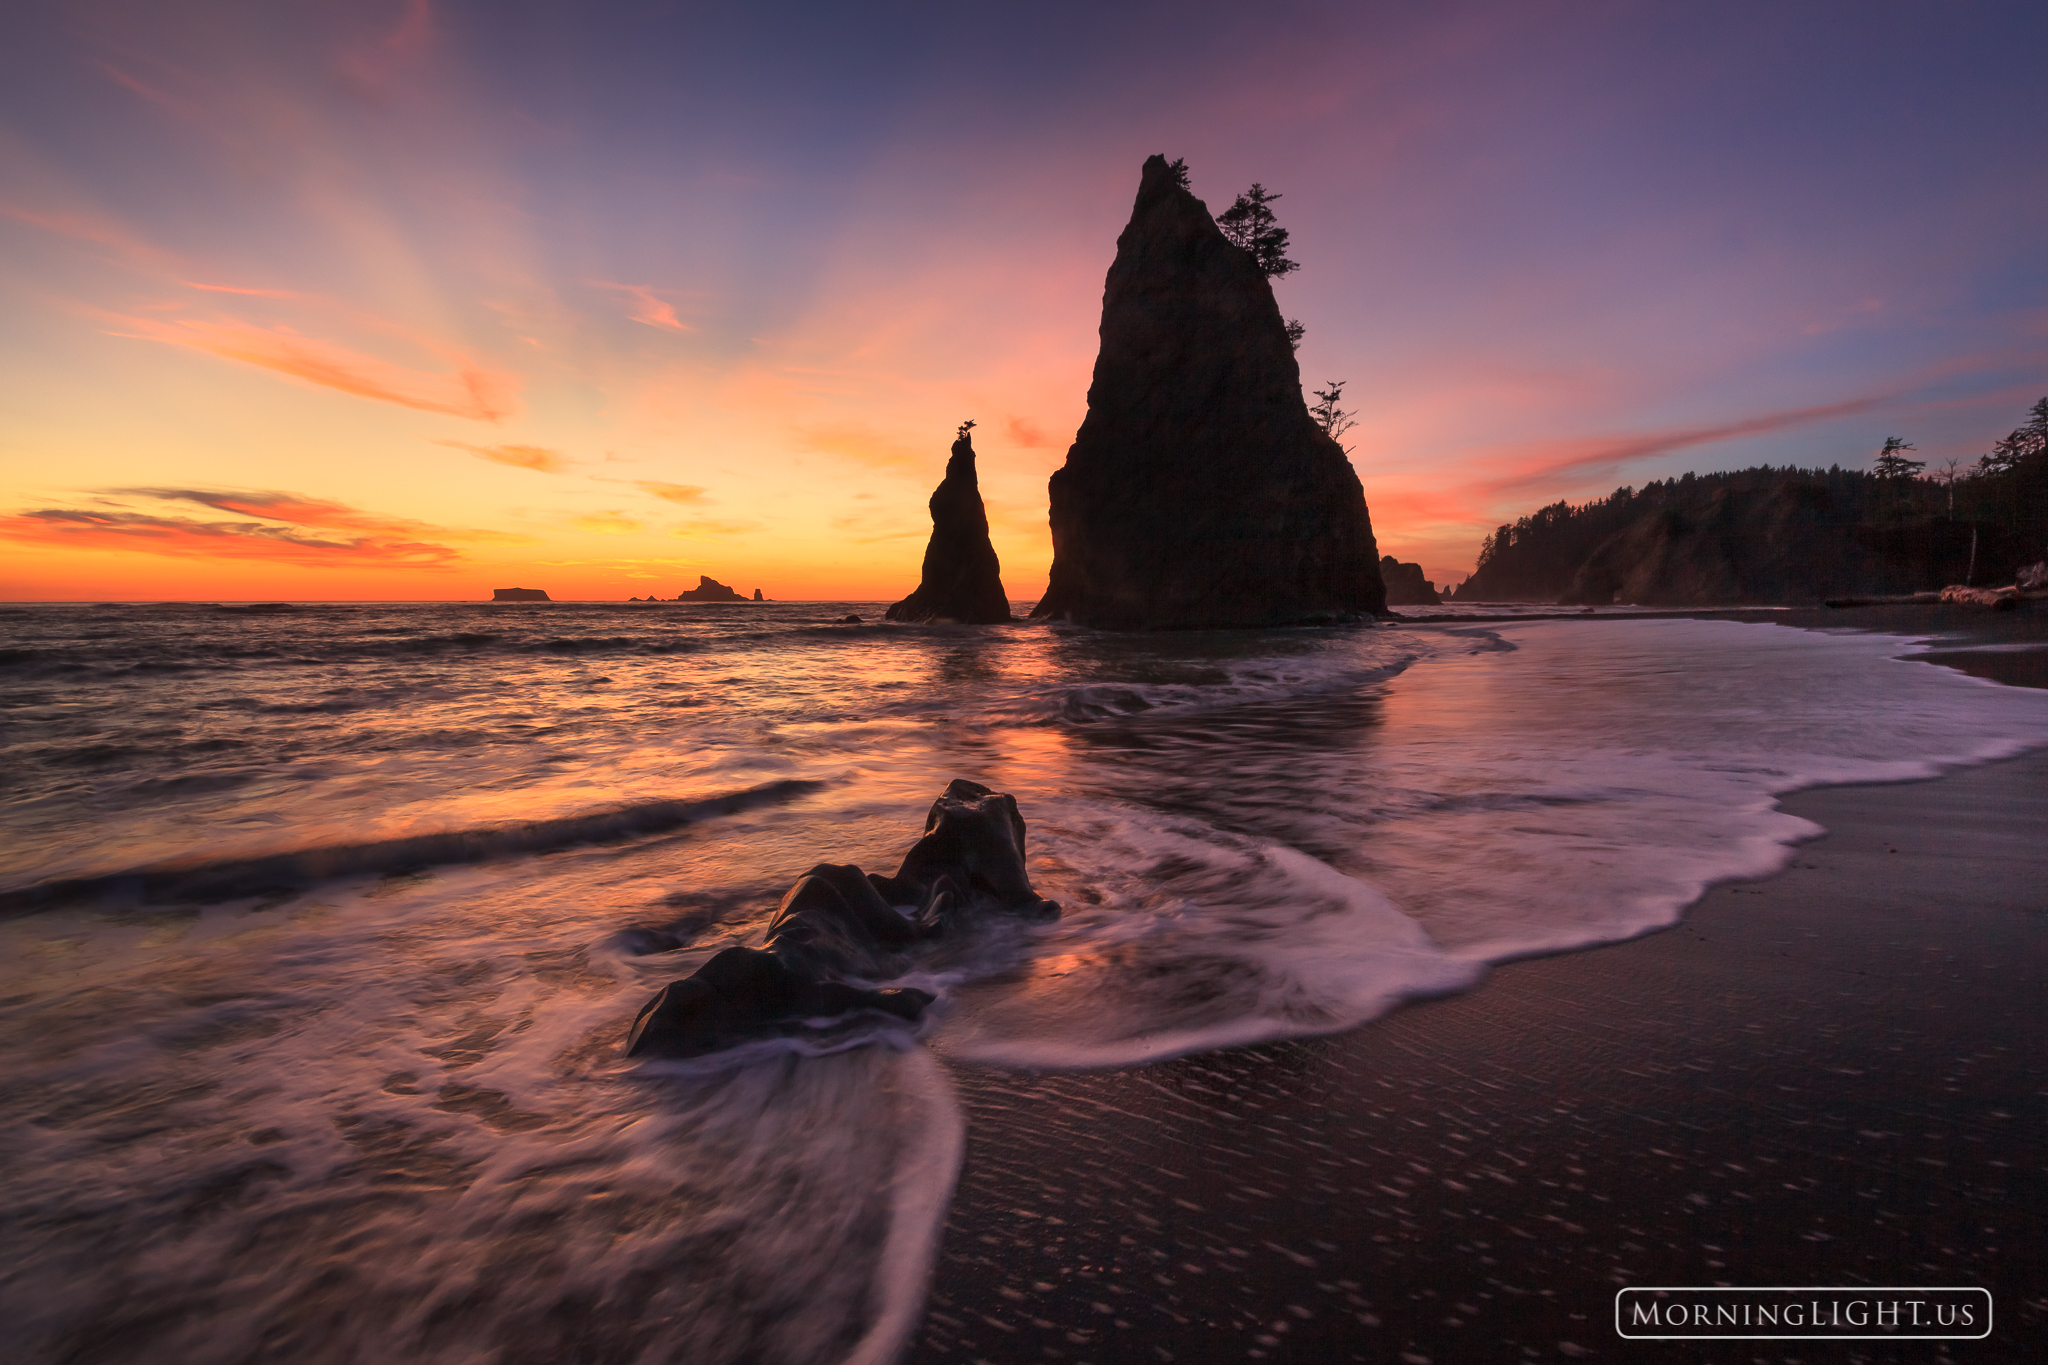 A spectacular sunset at Rialto Beach in Olympic National Park.